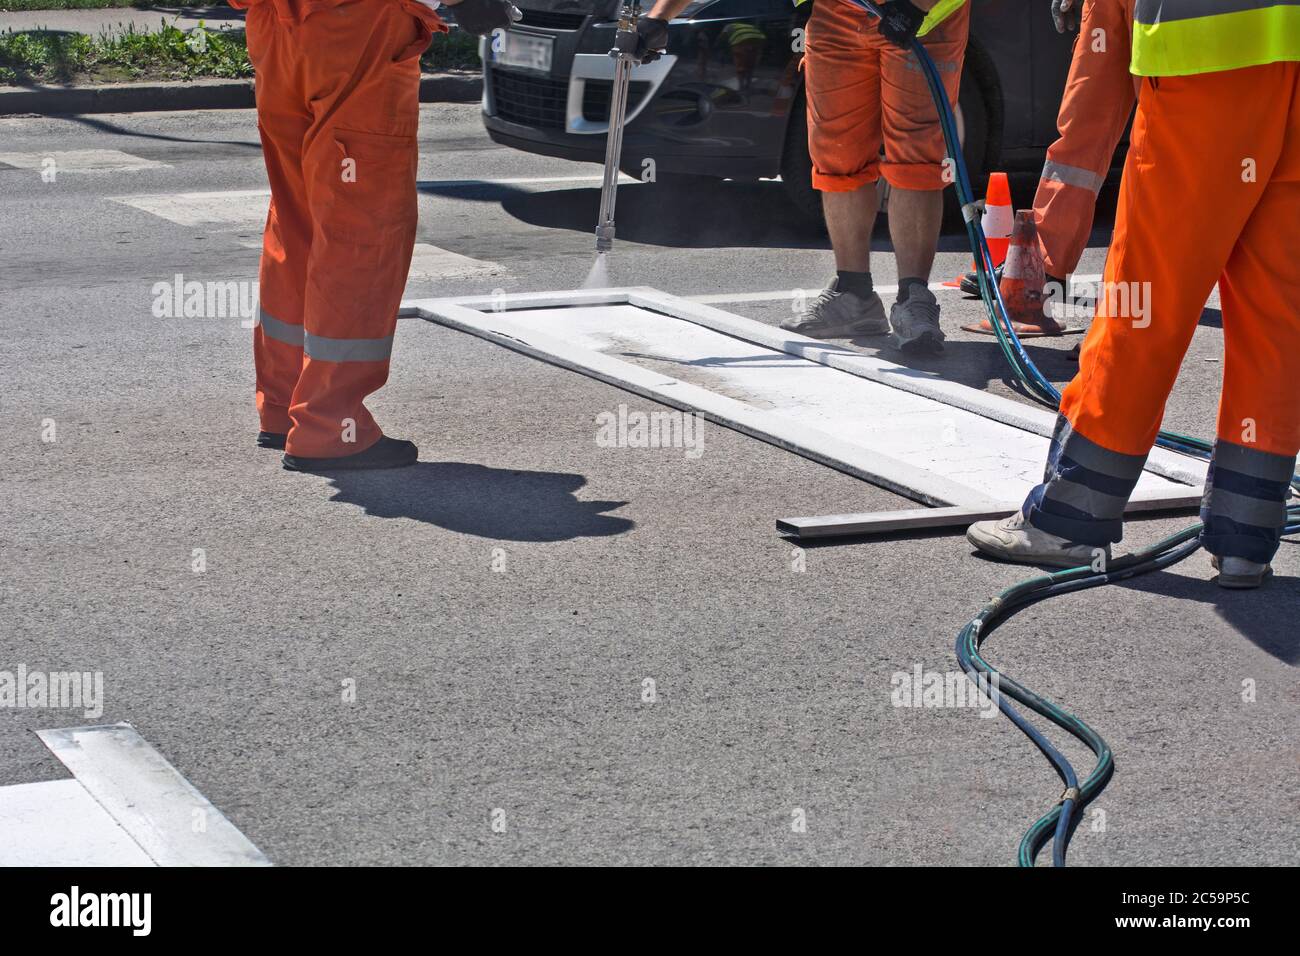 Workers are painting a stop line in a city street. Stock Photo